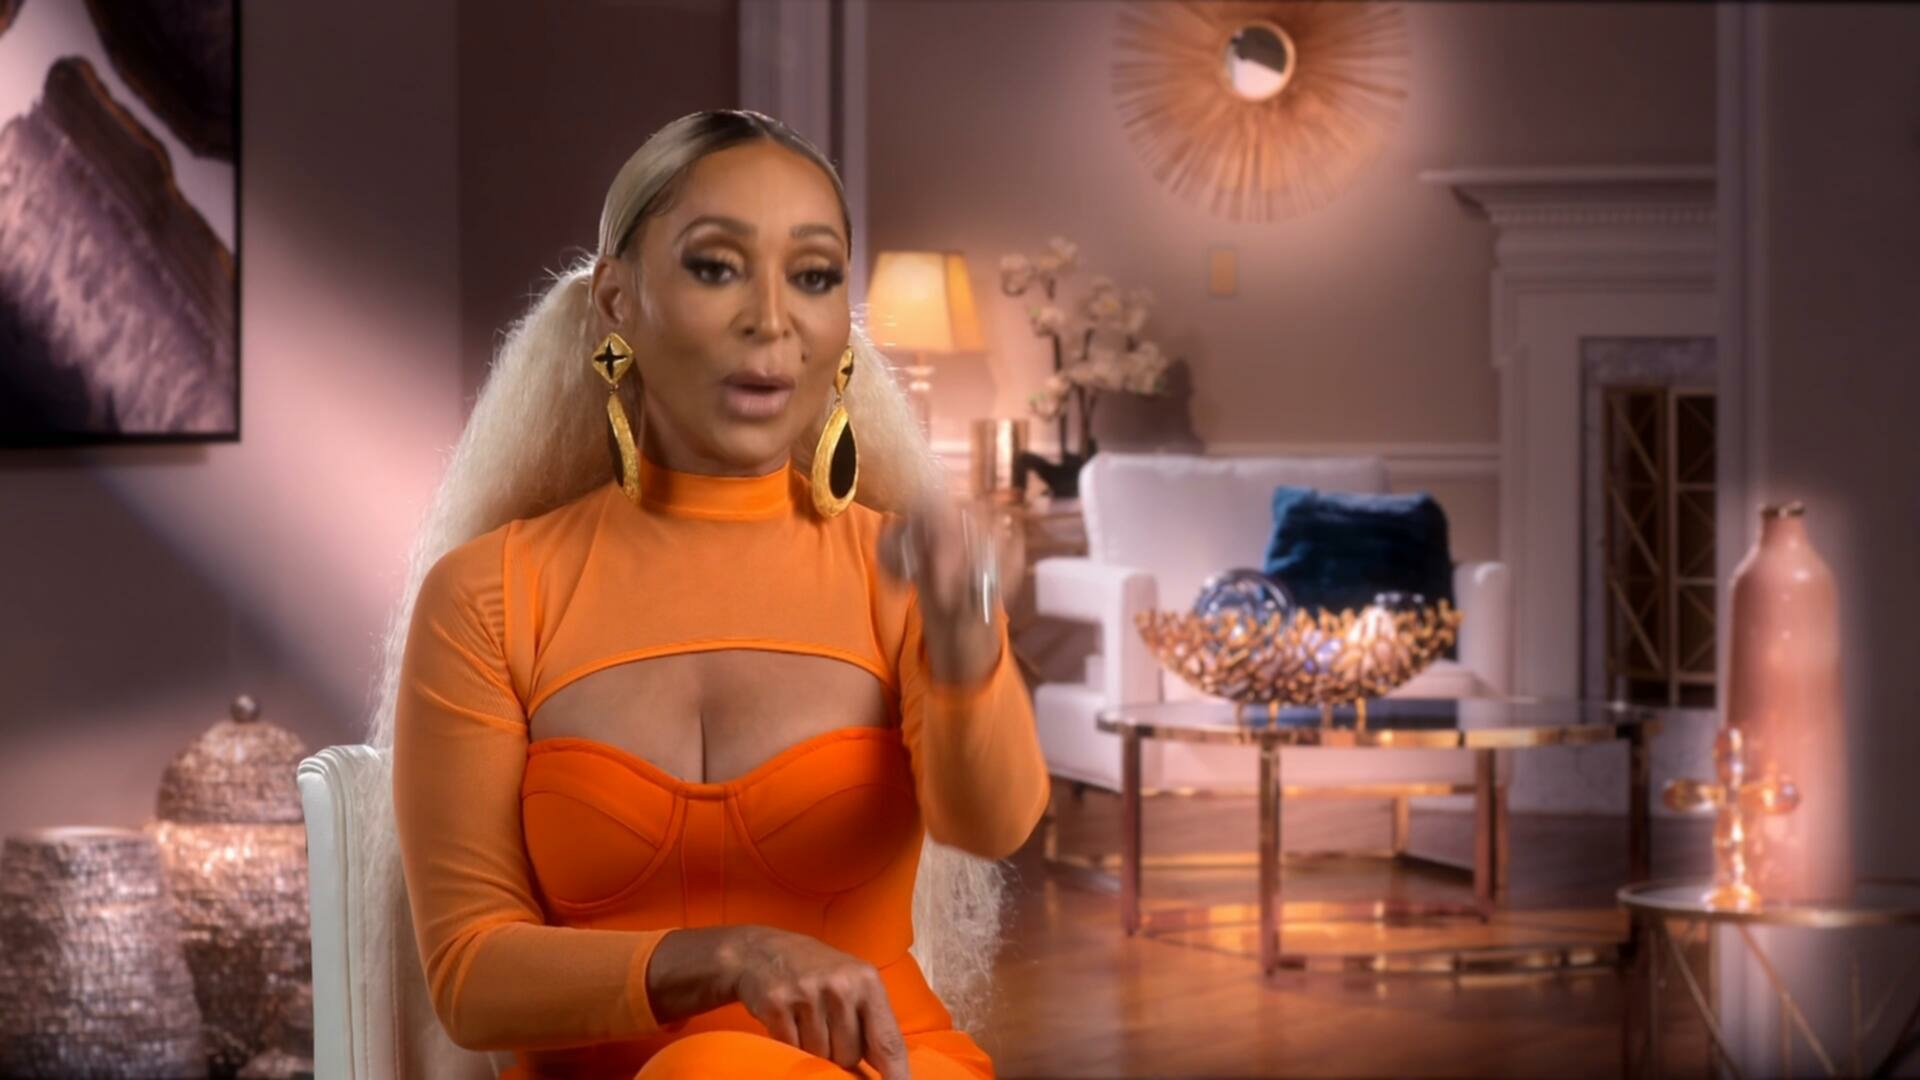 The Real Housewives of Potomac S08E15 Fools Gold 1080p AMZN WEB DL DDP2 0 H 264 NTb TGx